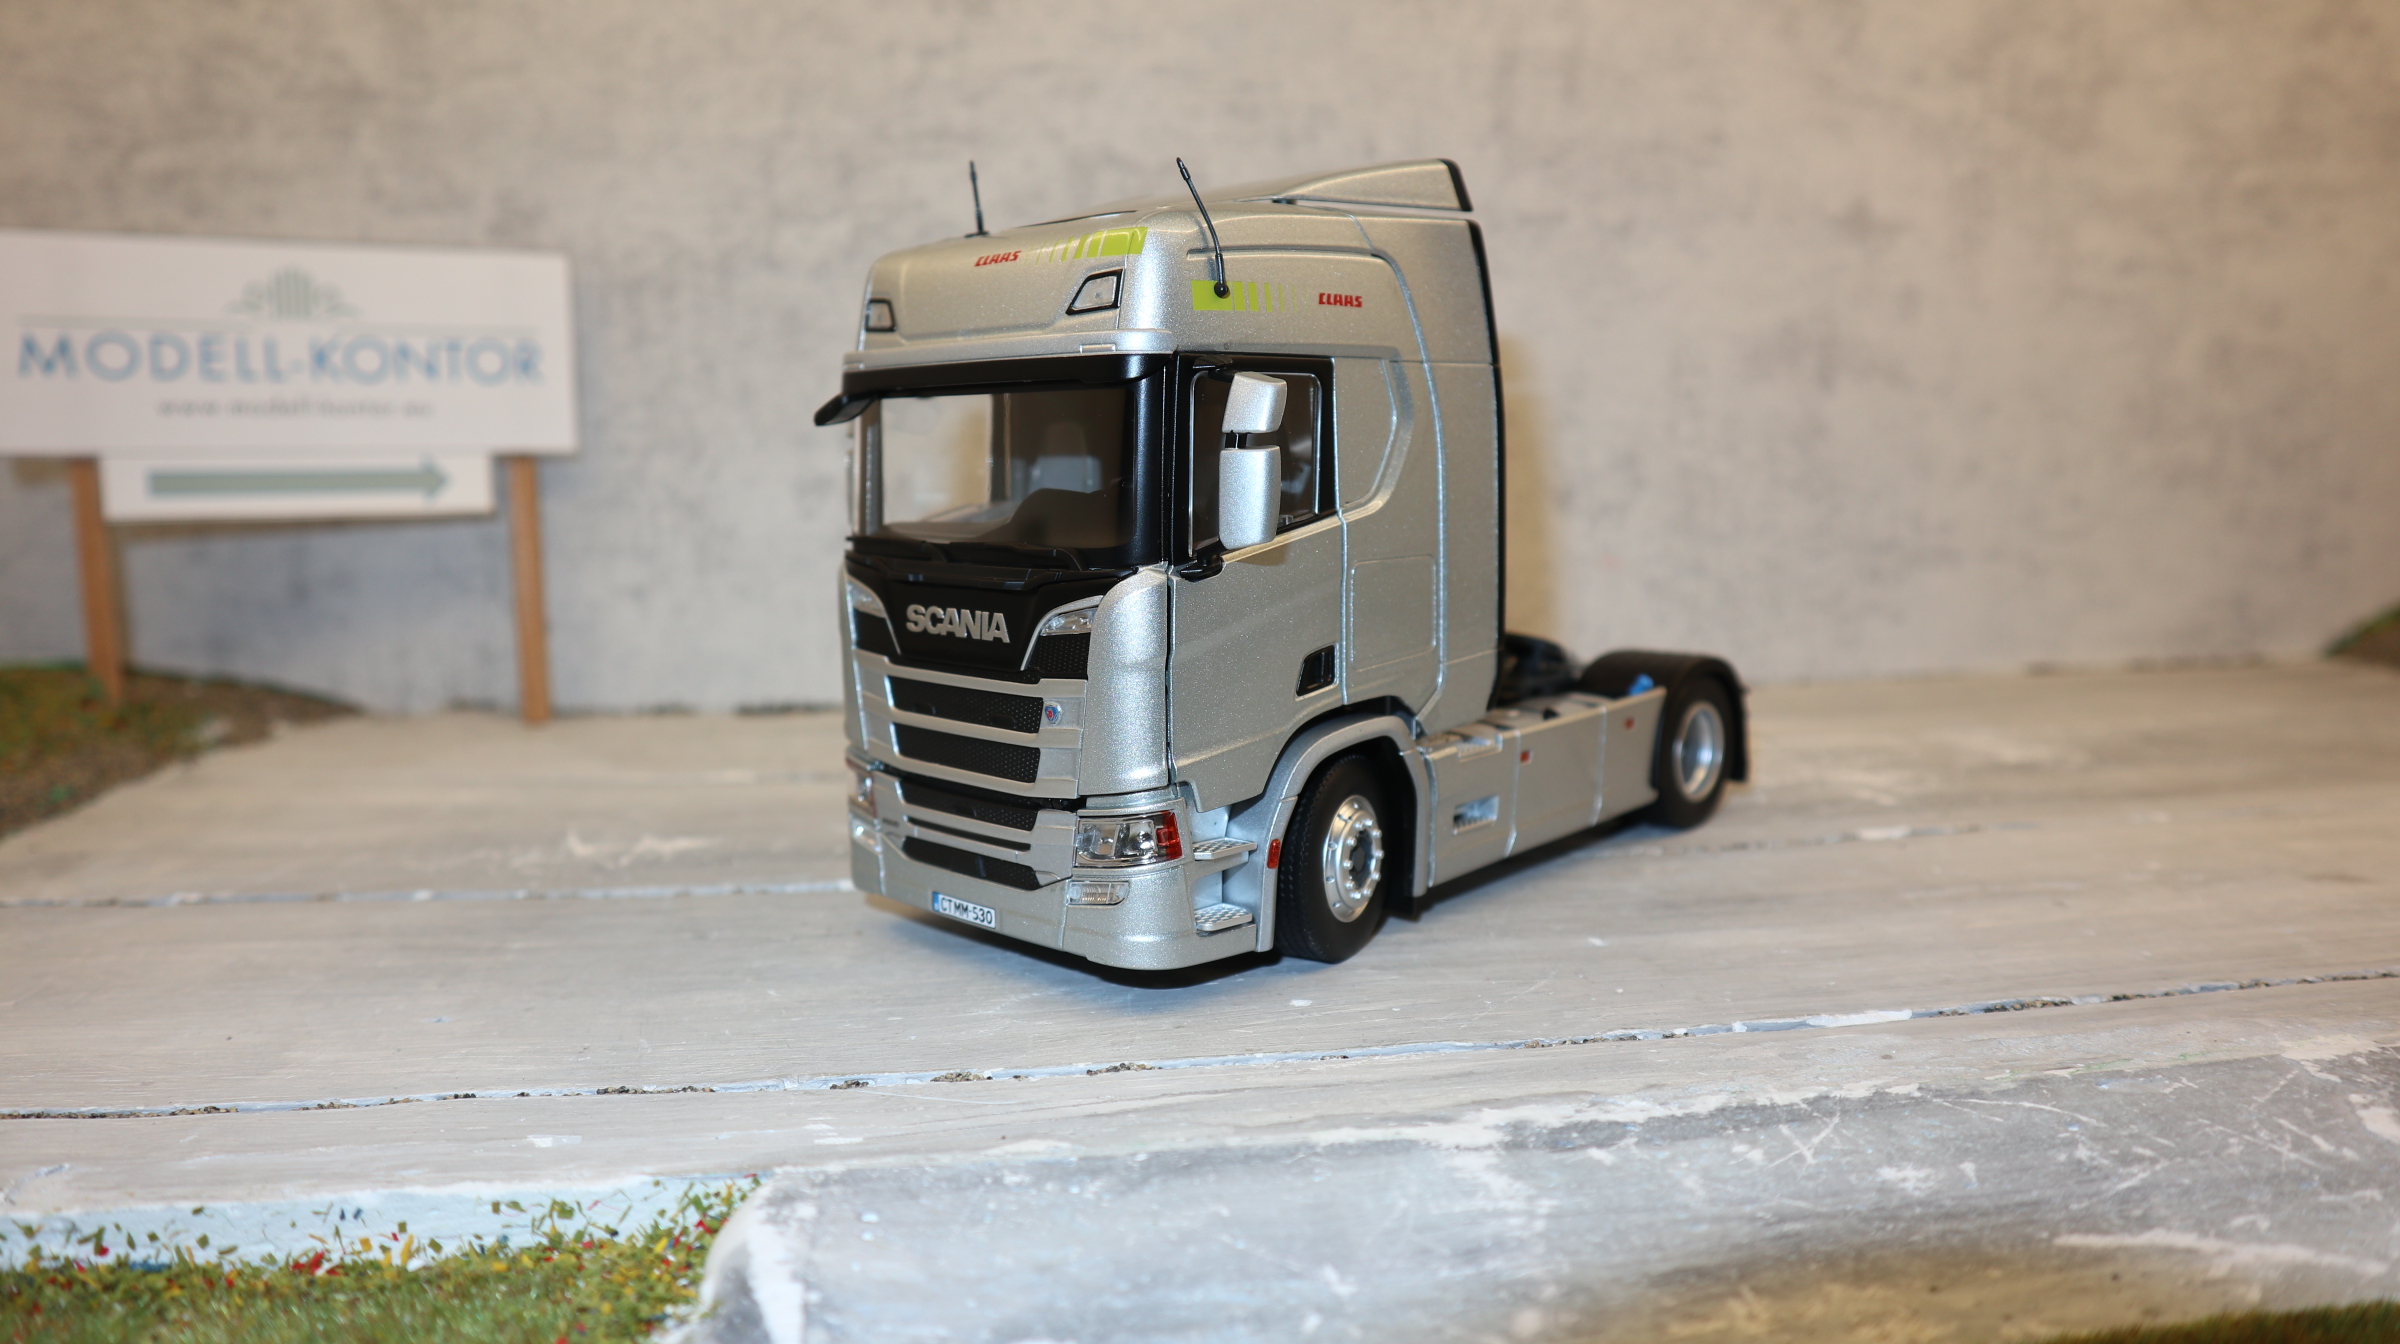 MarGe 2014-06-01 in 1:32, SCANIA R500 4x2 silber Edition CLAAS, NEU in OVP